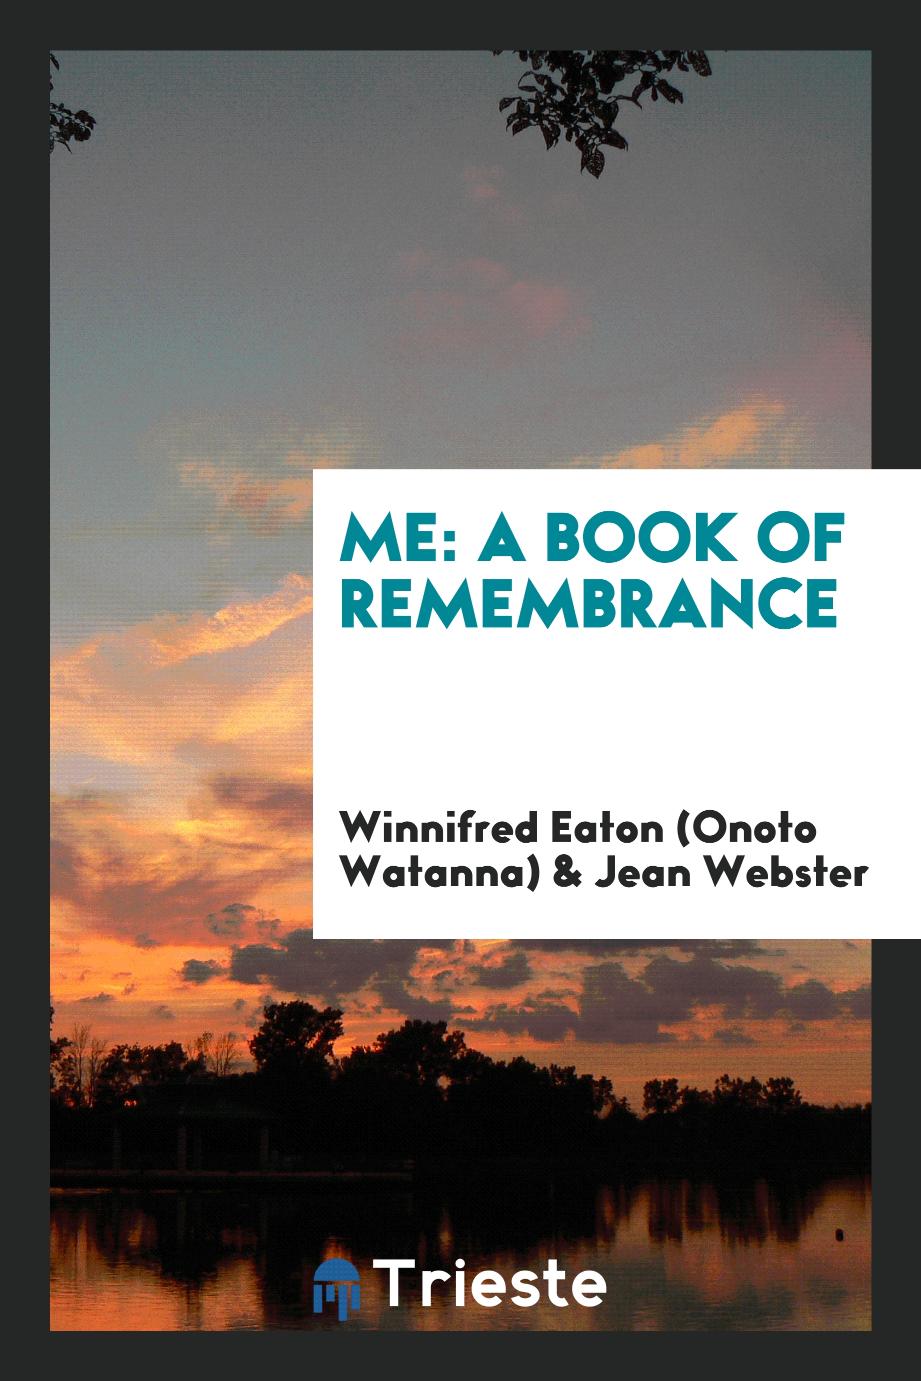 Me: A Book of Remembrance